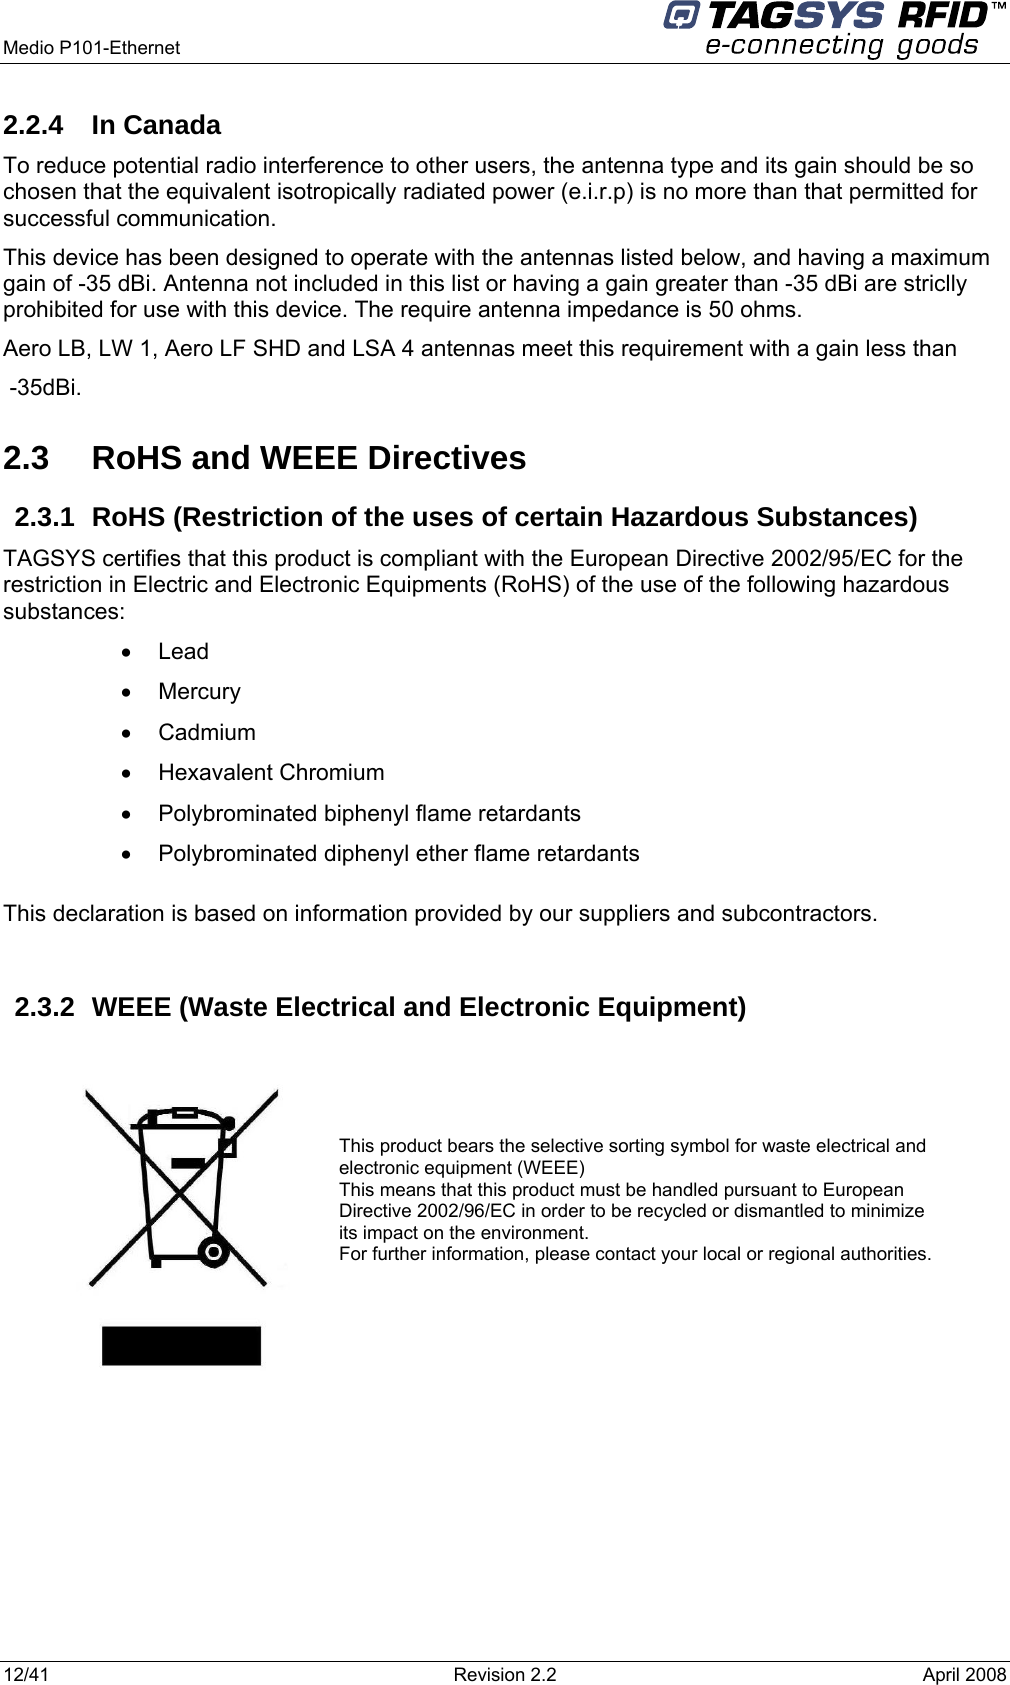  Medio P101-Ethernet     12/41  Revision 2.2  April 2008 2.2.4 In Canada To reduce potential radio interference to other users, the antenna type and its gain should be so chosen that the equivalent isotropically radiated power (e.i.r.p) is no more than that permitted for successful communication. This device has been designed to operate with the antennas listed below, and having a maximum gain of -35 dBi. Antenna not included in this list or having a gain greater than -35 dBi are striclly prohibited for use with this device. The require antenna impedance is 50 ohms. Aero LB, LW 1, Aero LF SHD and LSA 4 antennas meet this requirement with a gain less than  -35dBi. 2.3  RoHS and WEEE Directives 2.3.1  RoHS (Restriction of the uses of certain Hazardous Substances) TAGSYS certifies that this product is compliant with the European Directive 2002/95/EC for the restriction in Electric and Electronic Equipments (RoHS) of the use of the following hazardous substances: • Lead • Mercury • Cadmium • Hexavalent Chromium •  Polybrominated biphenyl flame retardants •  Polybrominated diphenyl ether flame retardants  This declaration is based on information provided by our suppliers and subcontractors.  2.3.2 WEEE (Waste Electrical and Electronic Equipment)     This product bears the selective sorting symbol for waste electrical and electronic equipment (WEEE) This means that this product must be handled pursuant to European Directive 2002/96/EC in order to be recycled or dismantled to minimize its impact on the environment. For further information, please contact your local or regional authorities.  